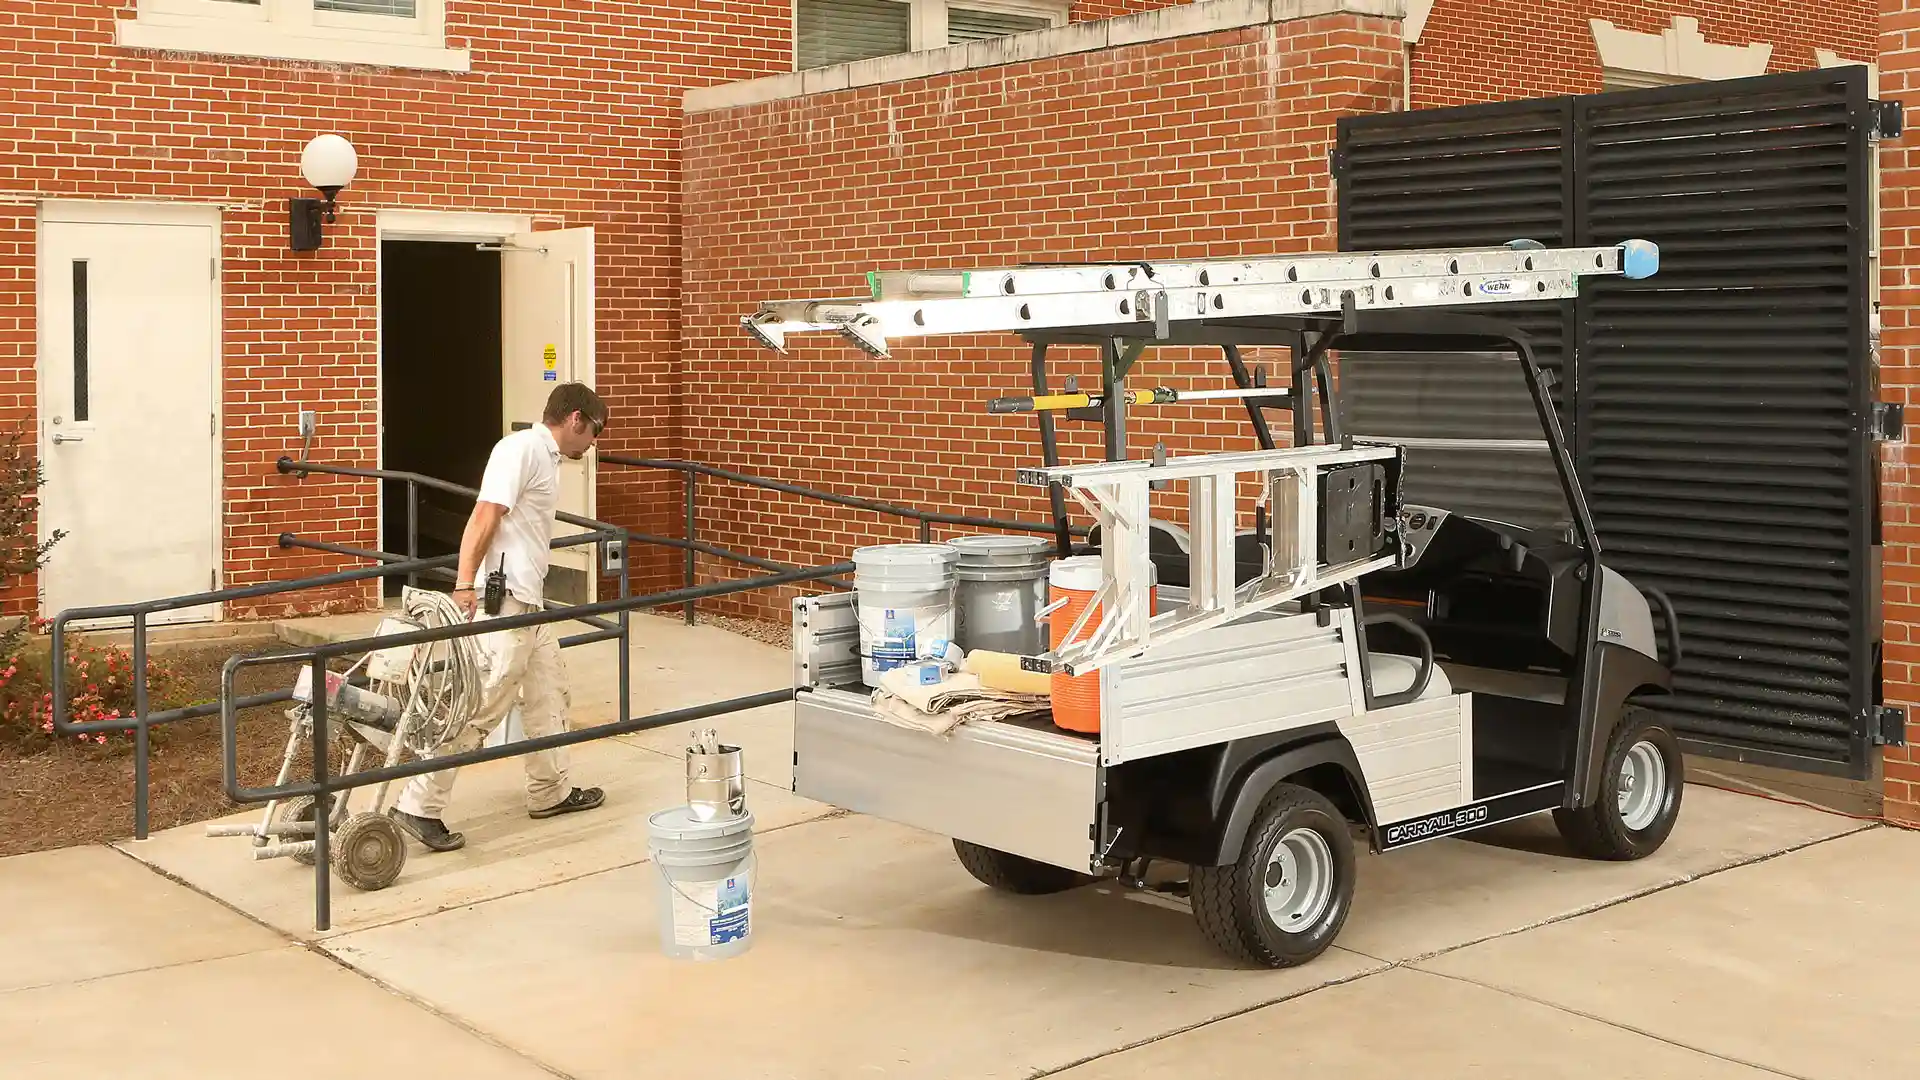 Carryall 300 utility vehicle for maintenance and construction work